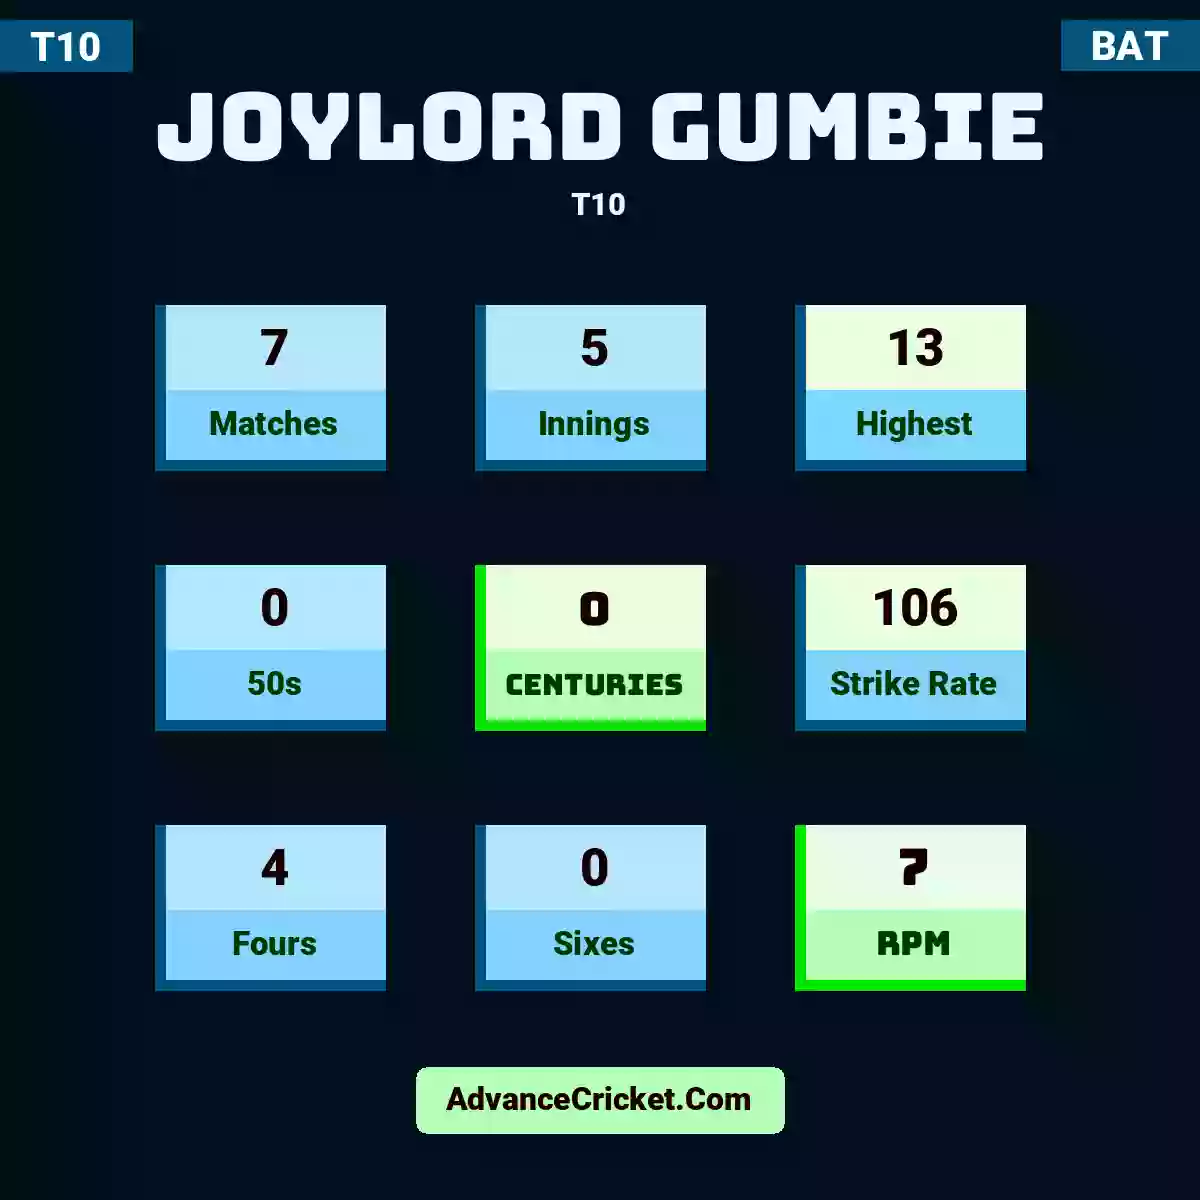 Joylord Gumbie T10 , Joylord Gumbie played 7 matches, scored 13 runs as highest, 0 half-centuries, and 0 centuries, with a strike rate of 106. J.Gumbie hit 4 fours and 0 sixes, with an RPM of 7.